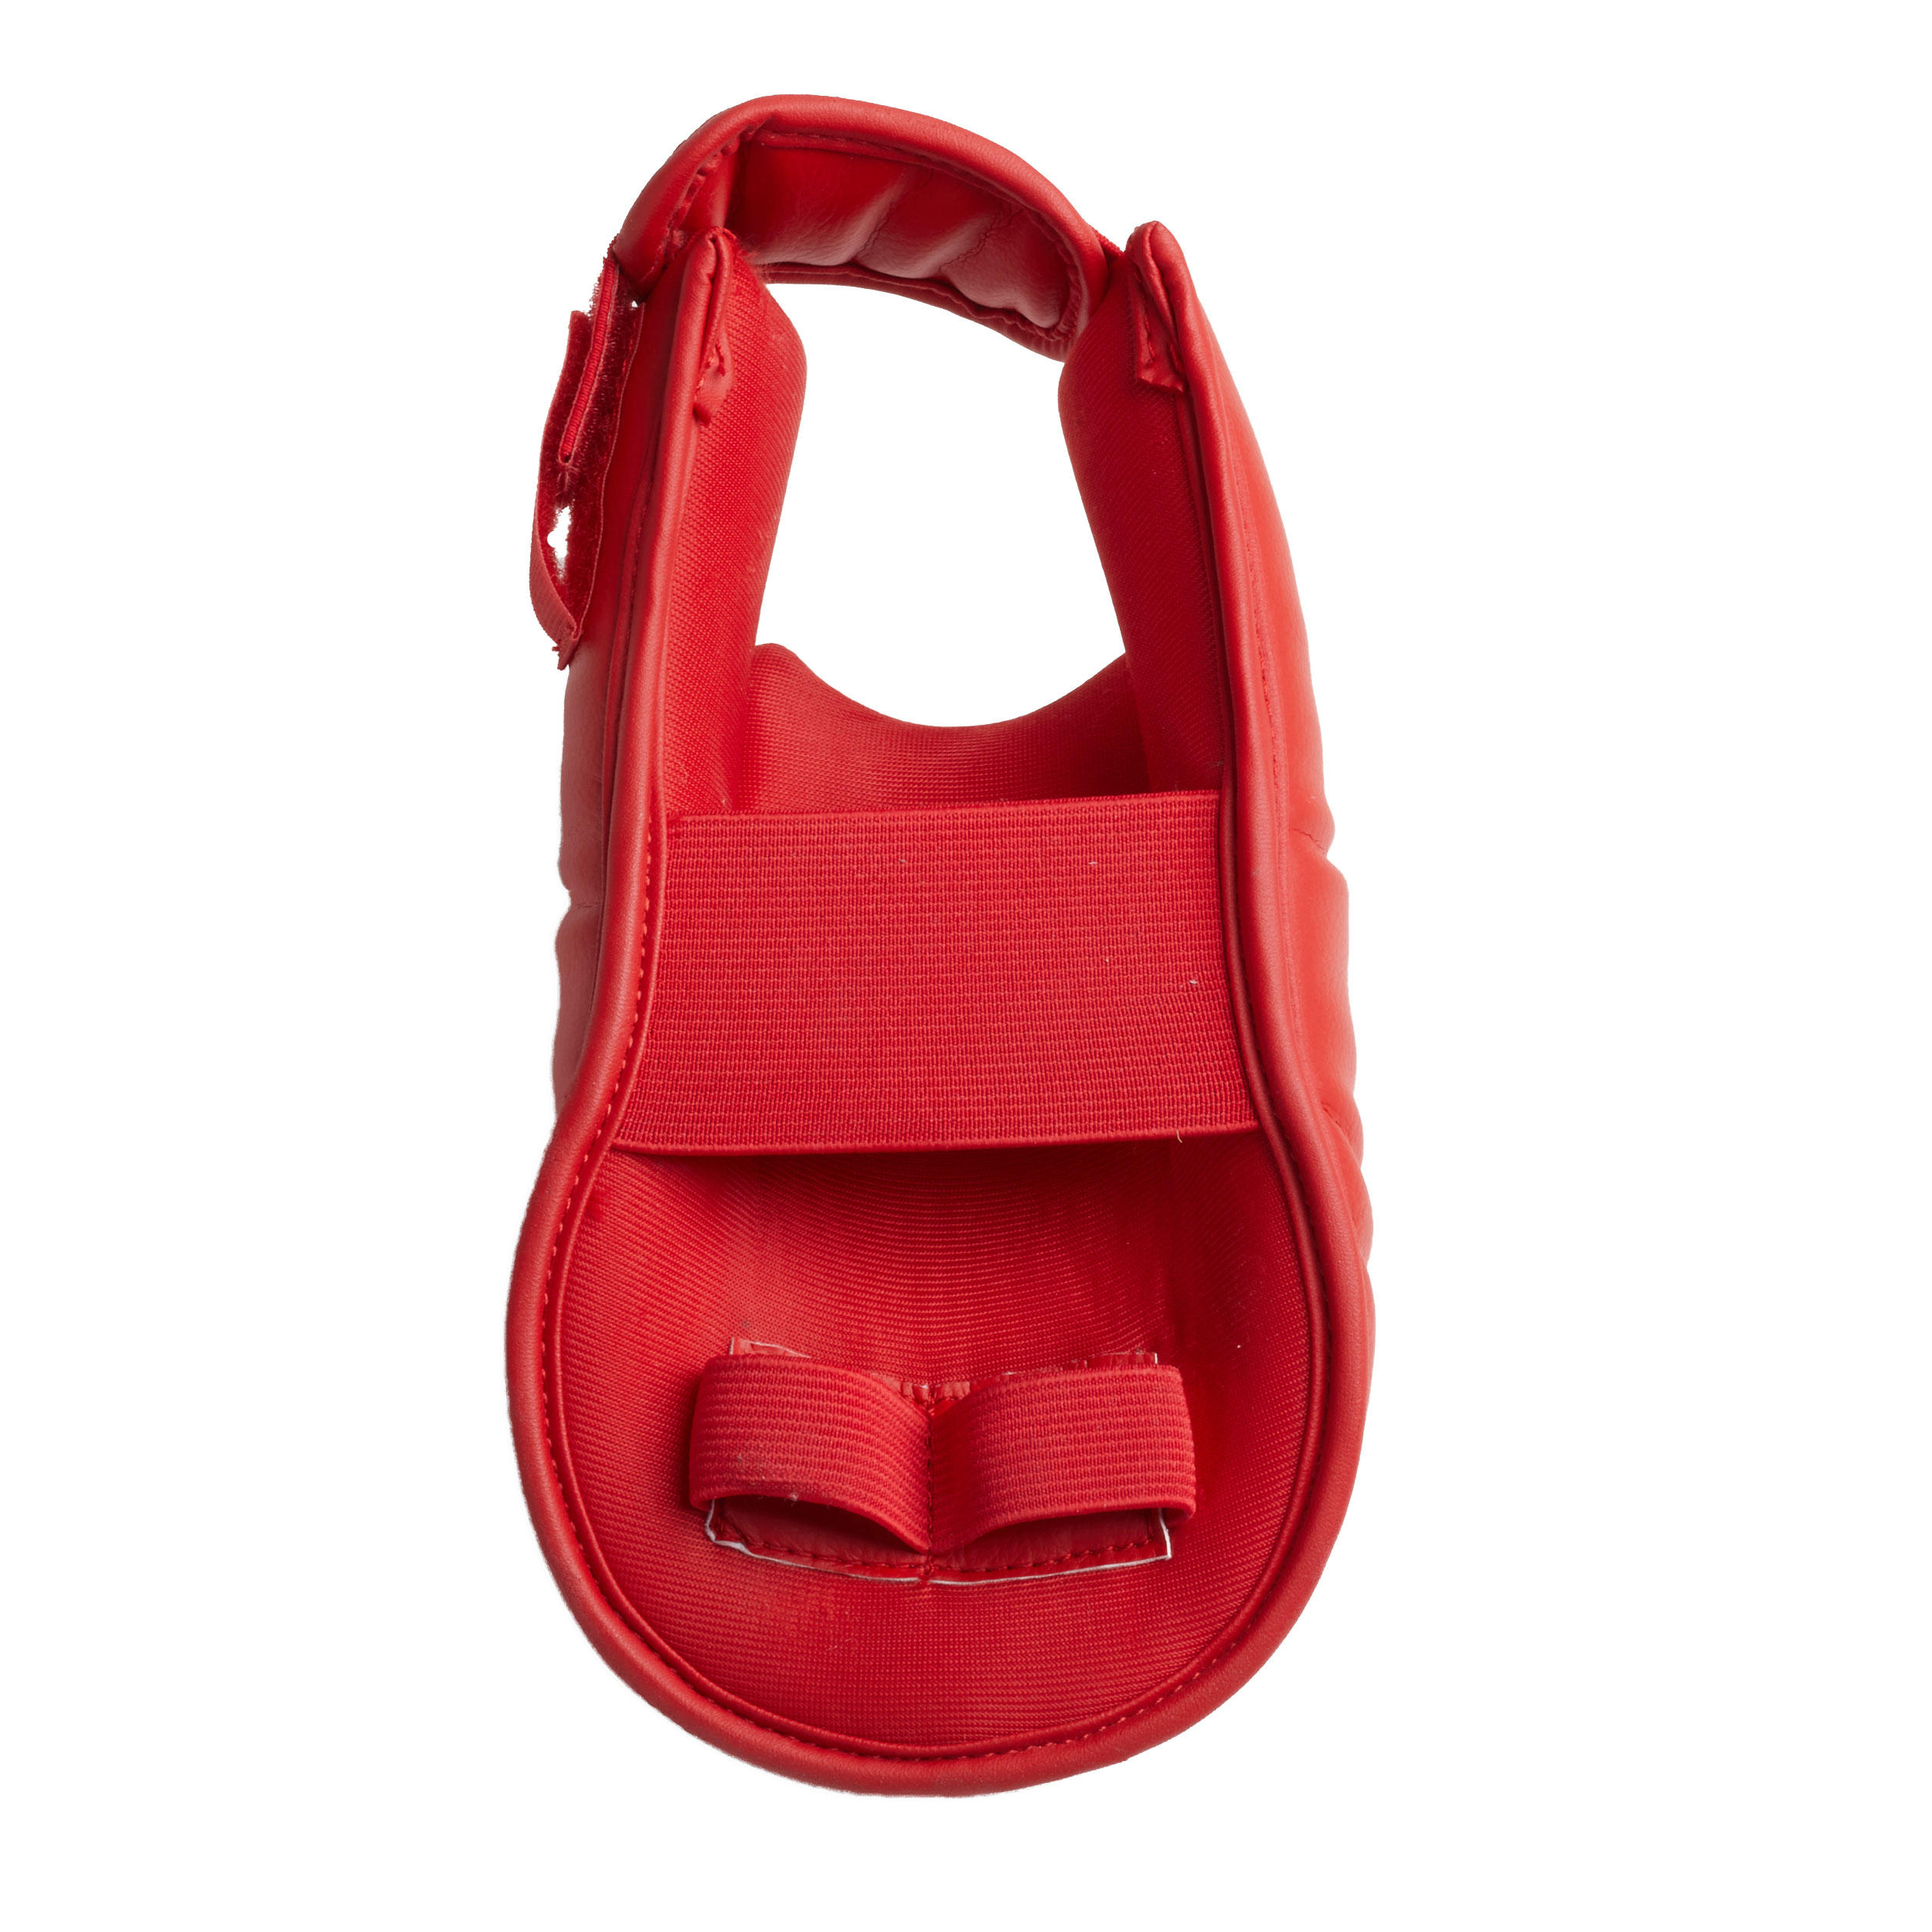 Karate Foot Protection - Red 5/5